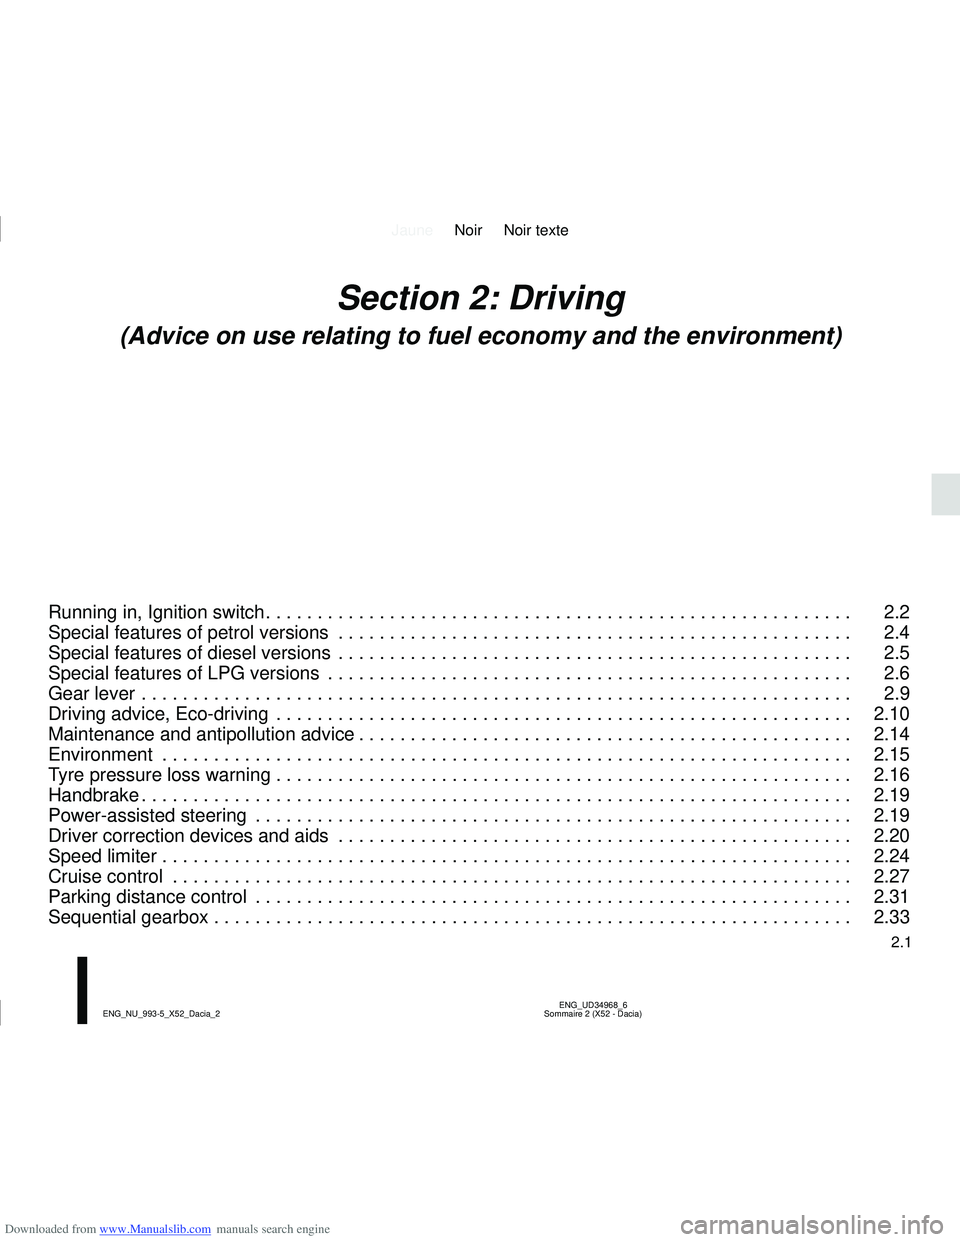 DACIA SANDERO 2019  Owners Manual Downloaded from www.Manualslib.com manuals search engine JauneNoir Noir texte
2.1
ENG_UD34968_6
Sommaire 2 (X52 - Dacia)
ENG_NU_993-5_X52_Dacia_2
Section 2: Driving
(Advice on use relating to fuel eco